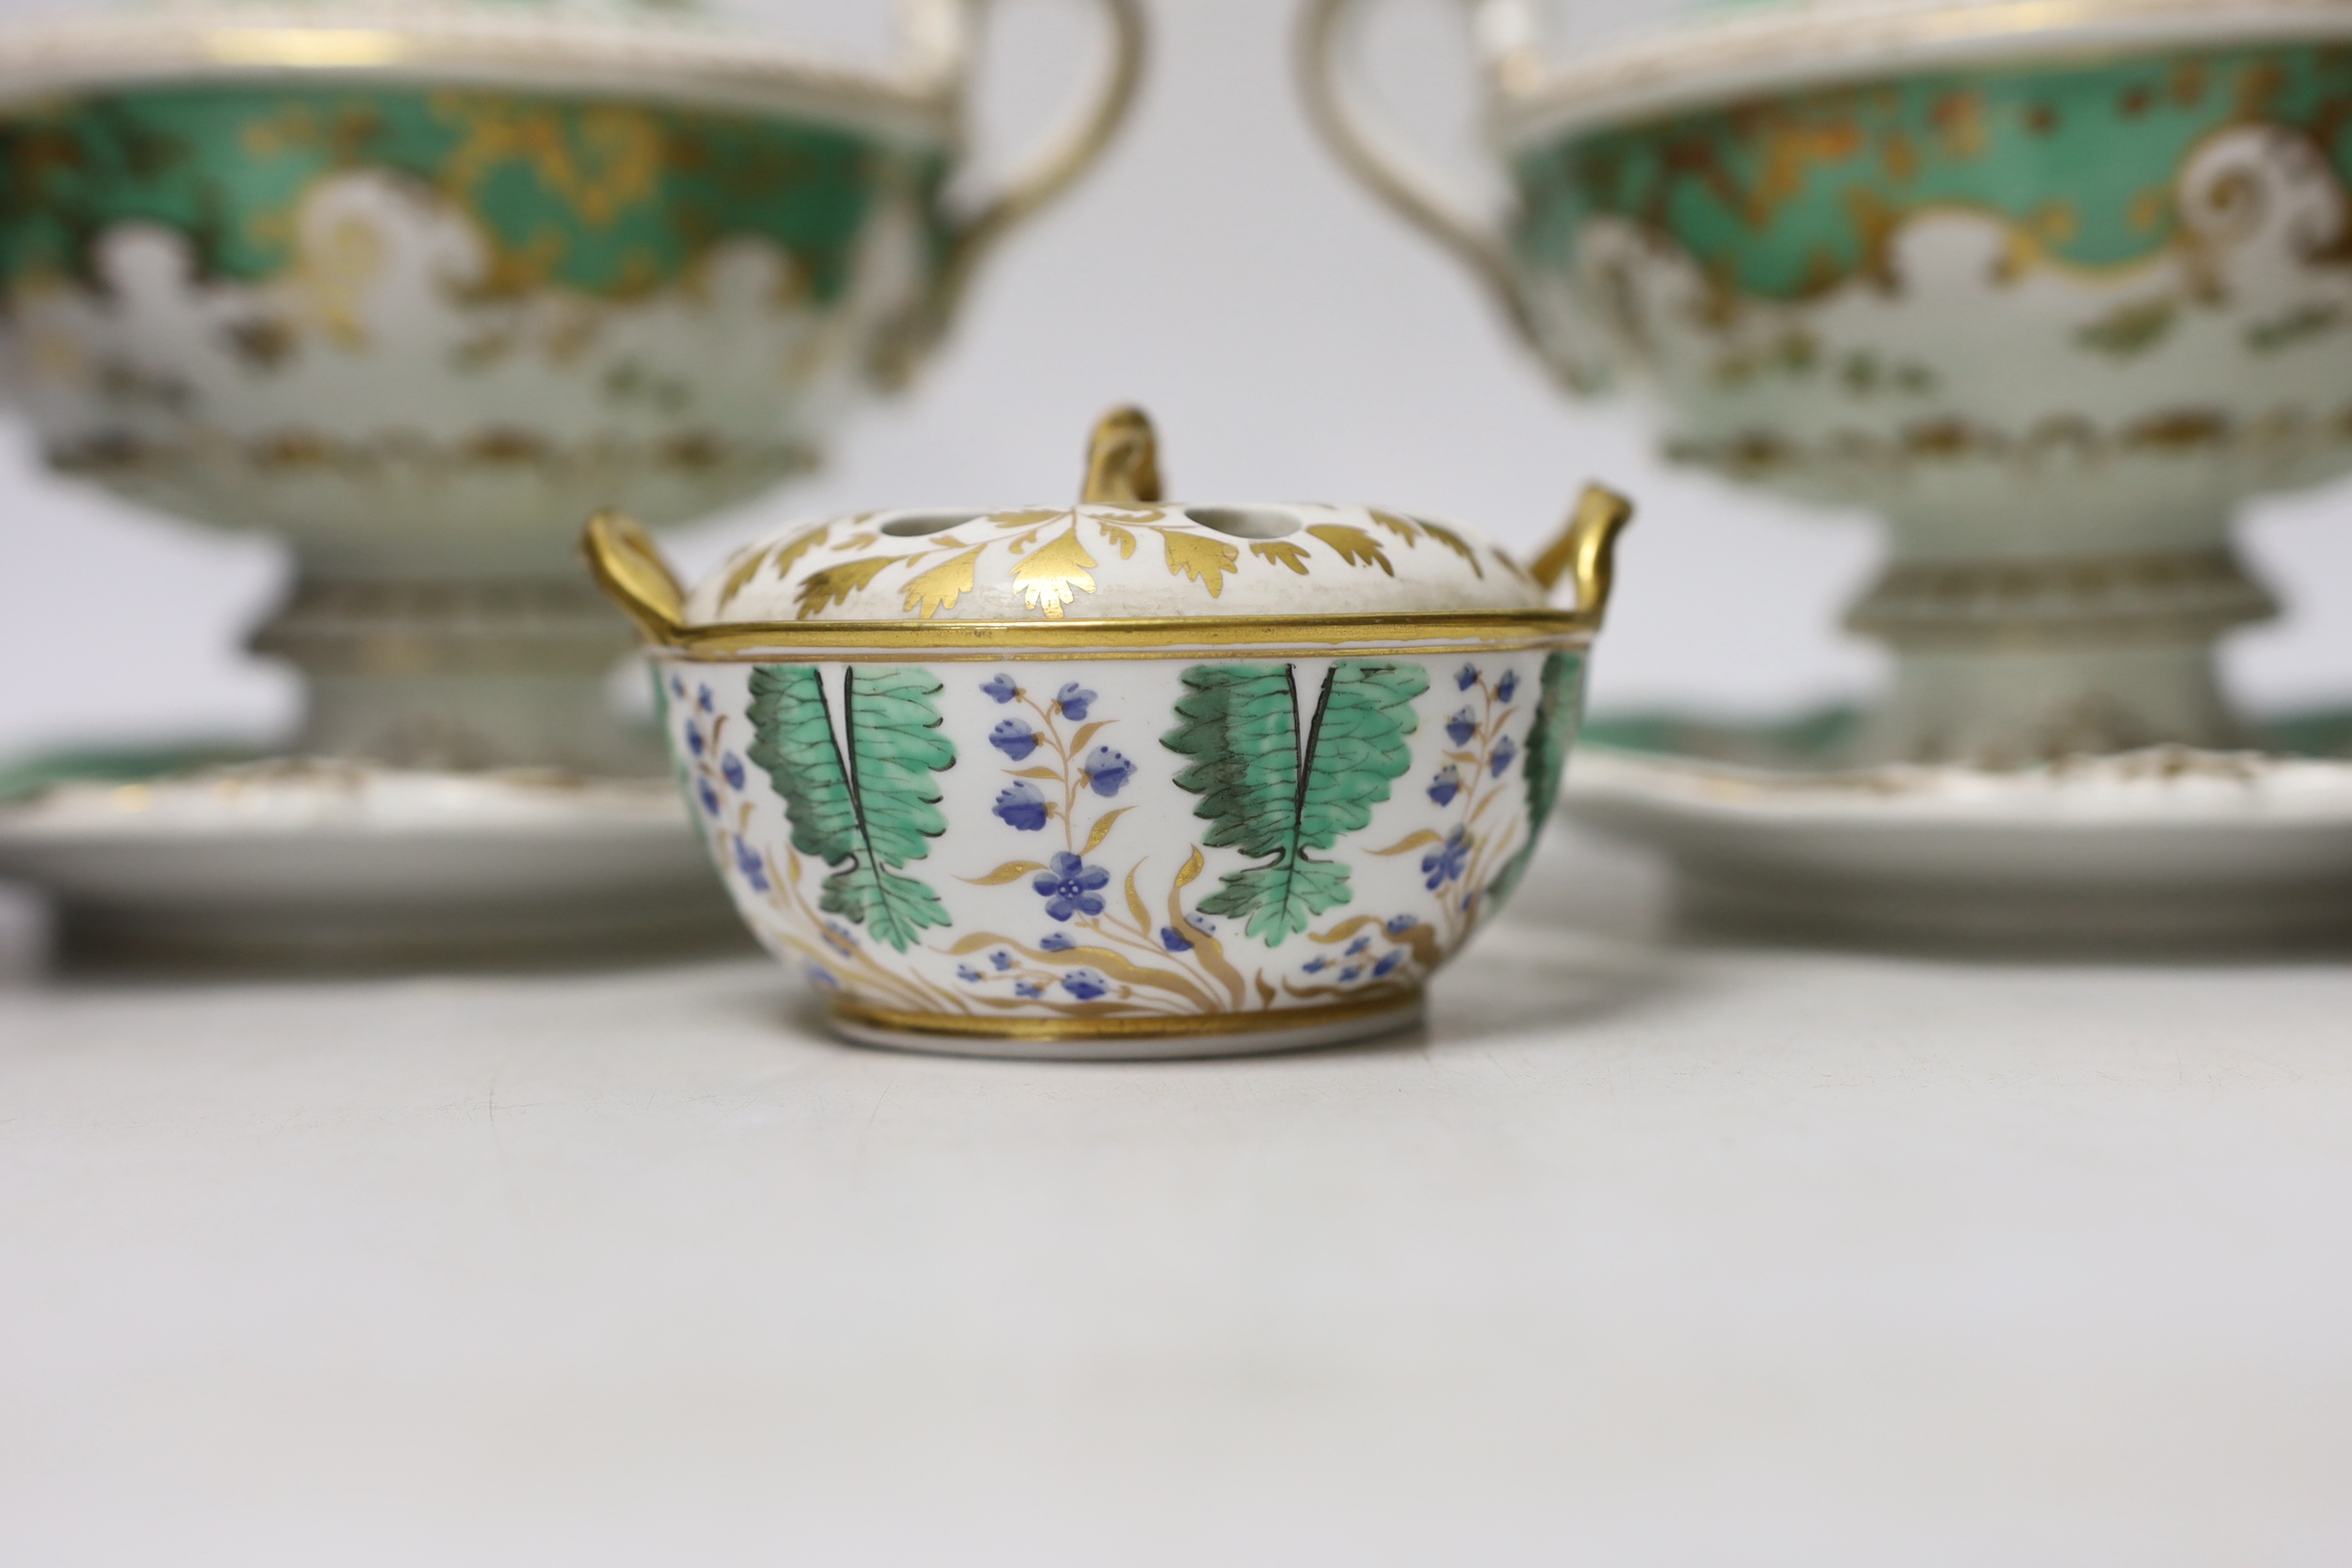 Early 19th century English porcelain including a Wedgwood pot pourri bowl and cover, two sauce tureens covers with integral stands, a butterfly painted trio and a bird painted spill vase